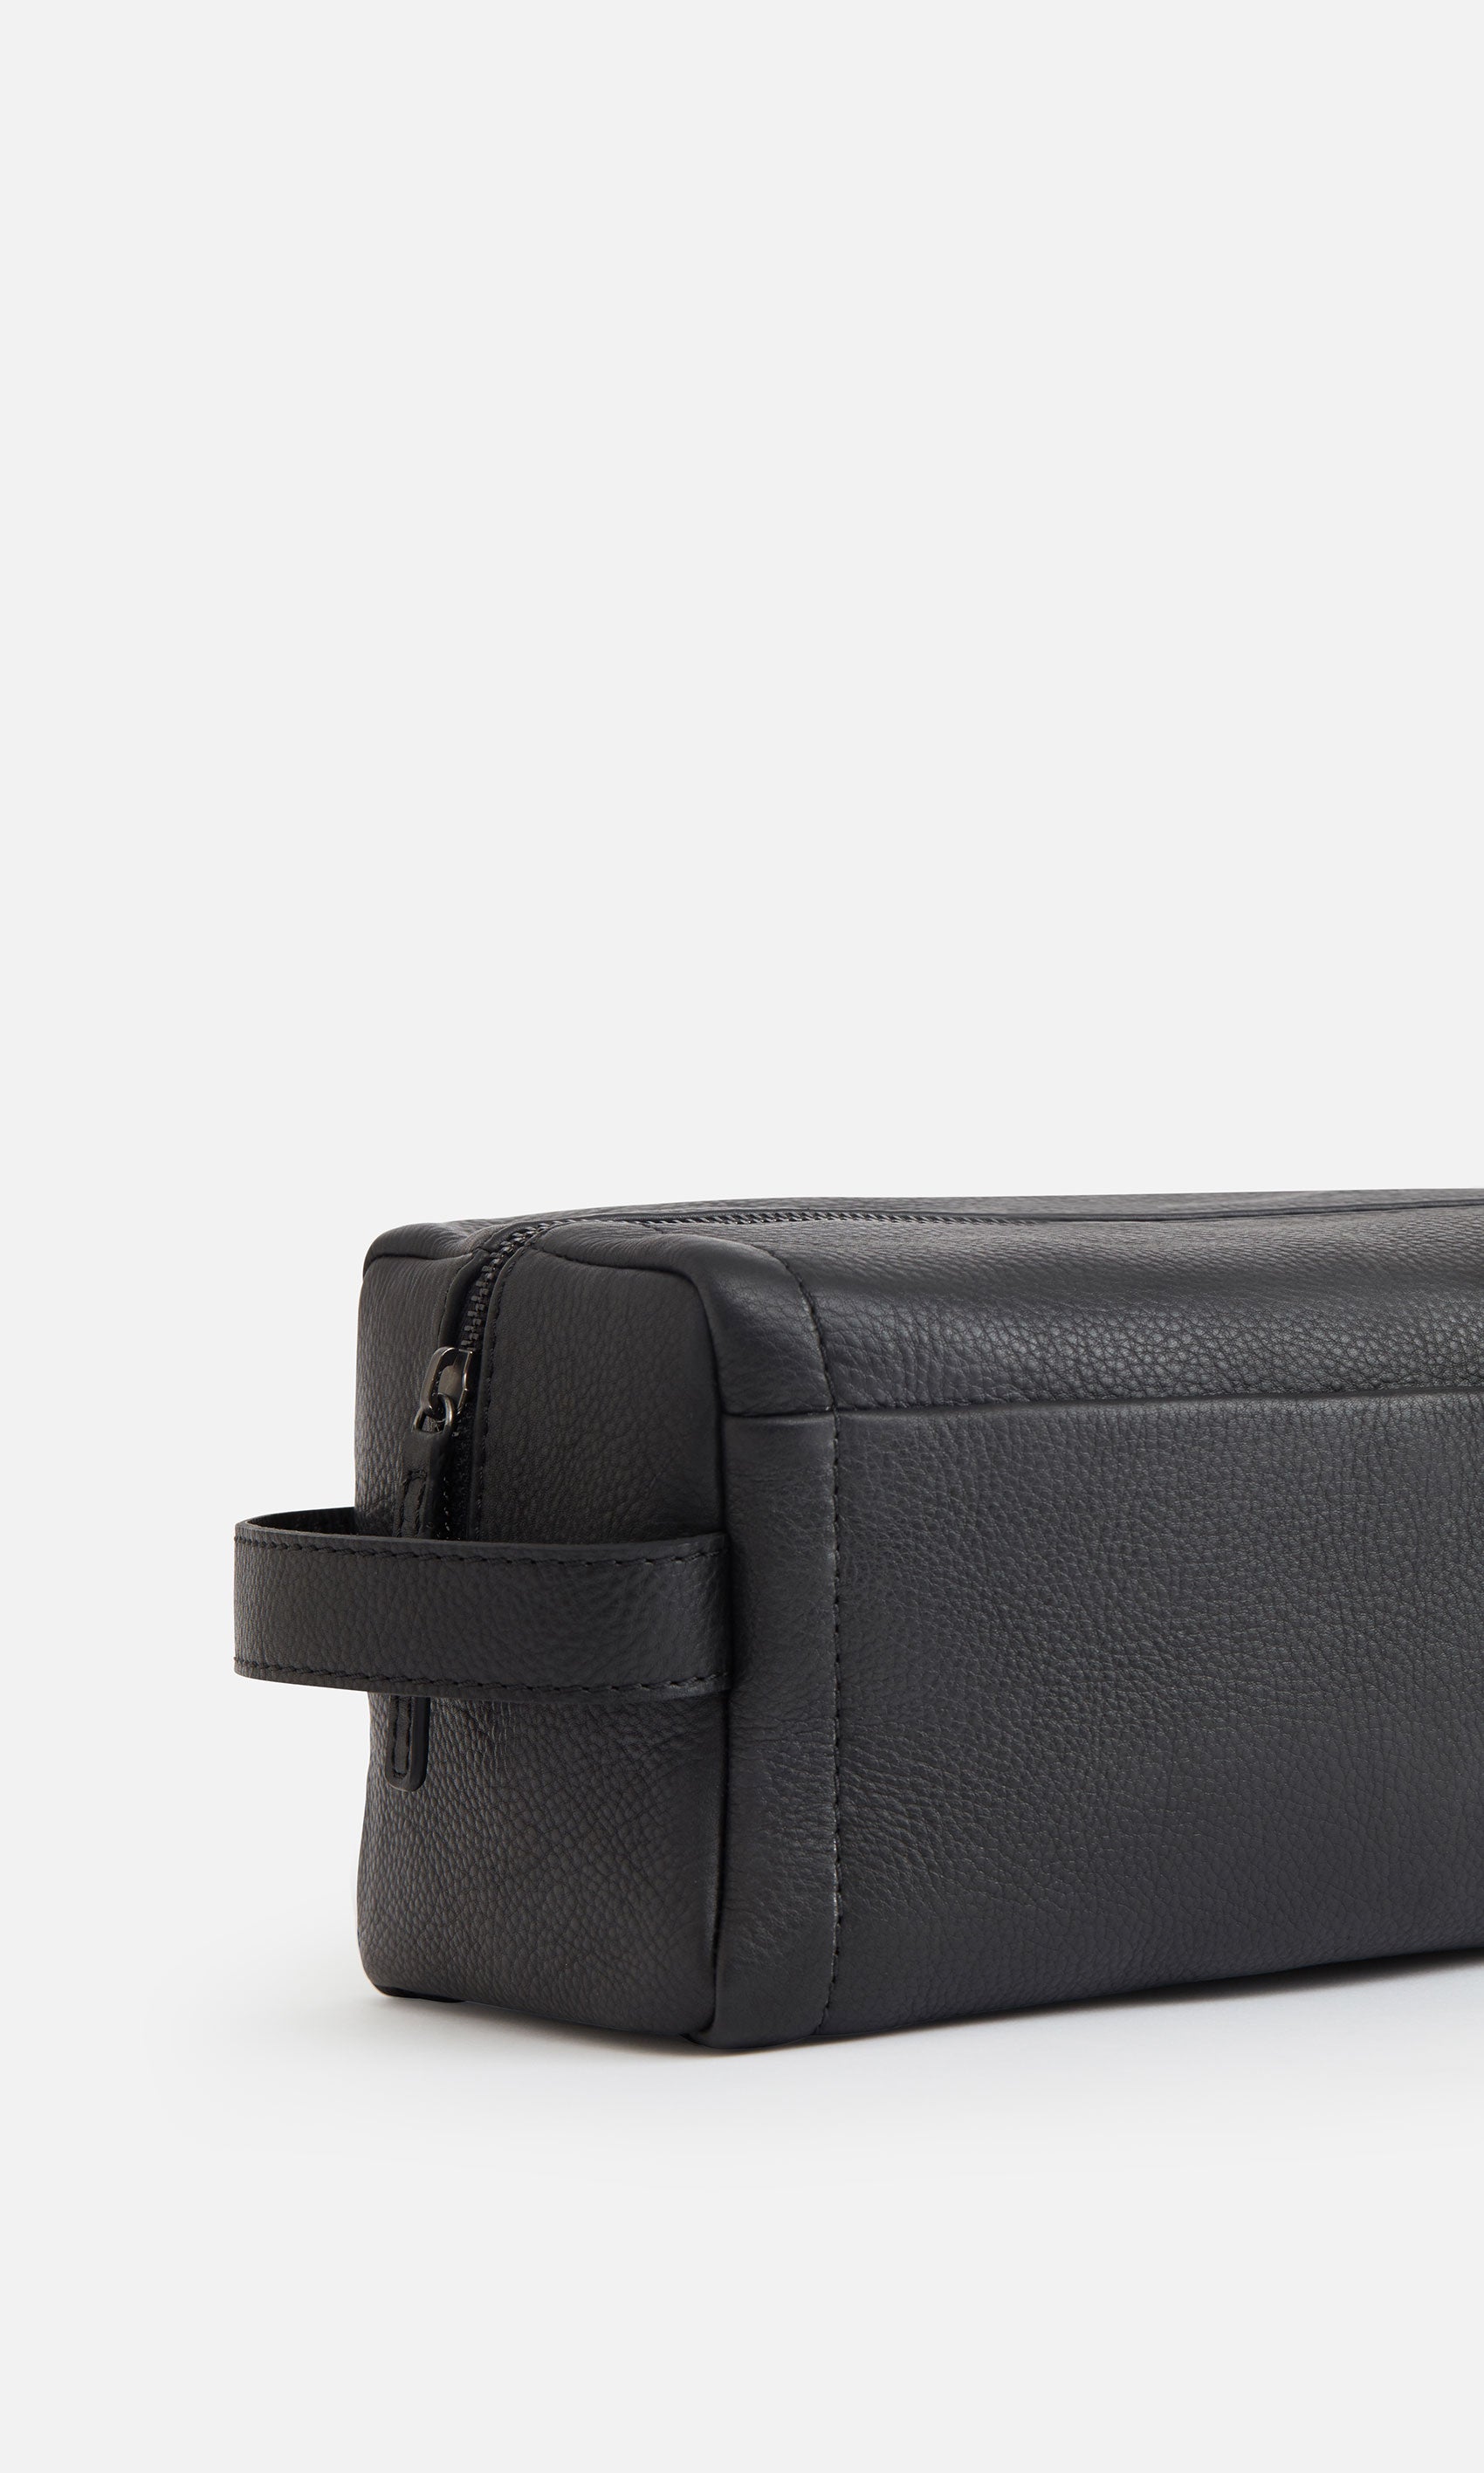 Men's Pouches, Small Leather Goods Collection